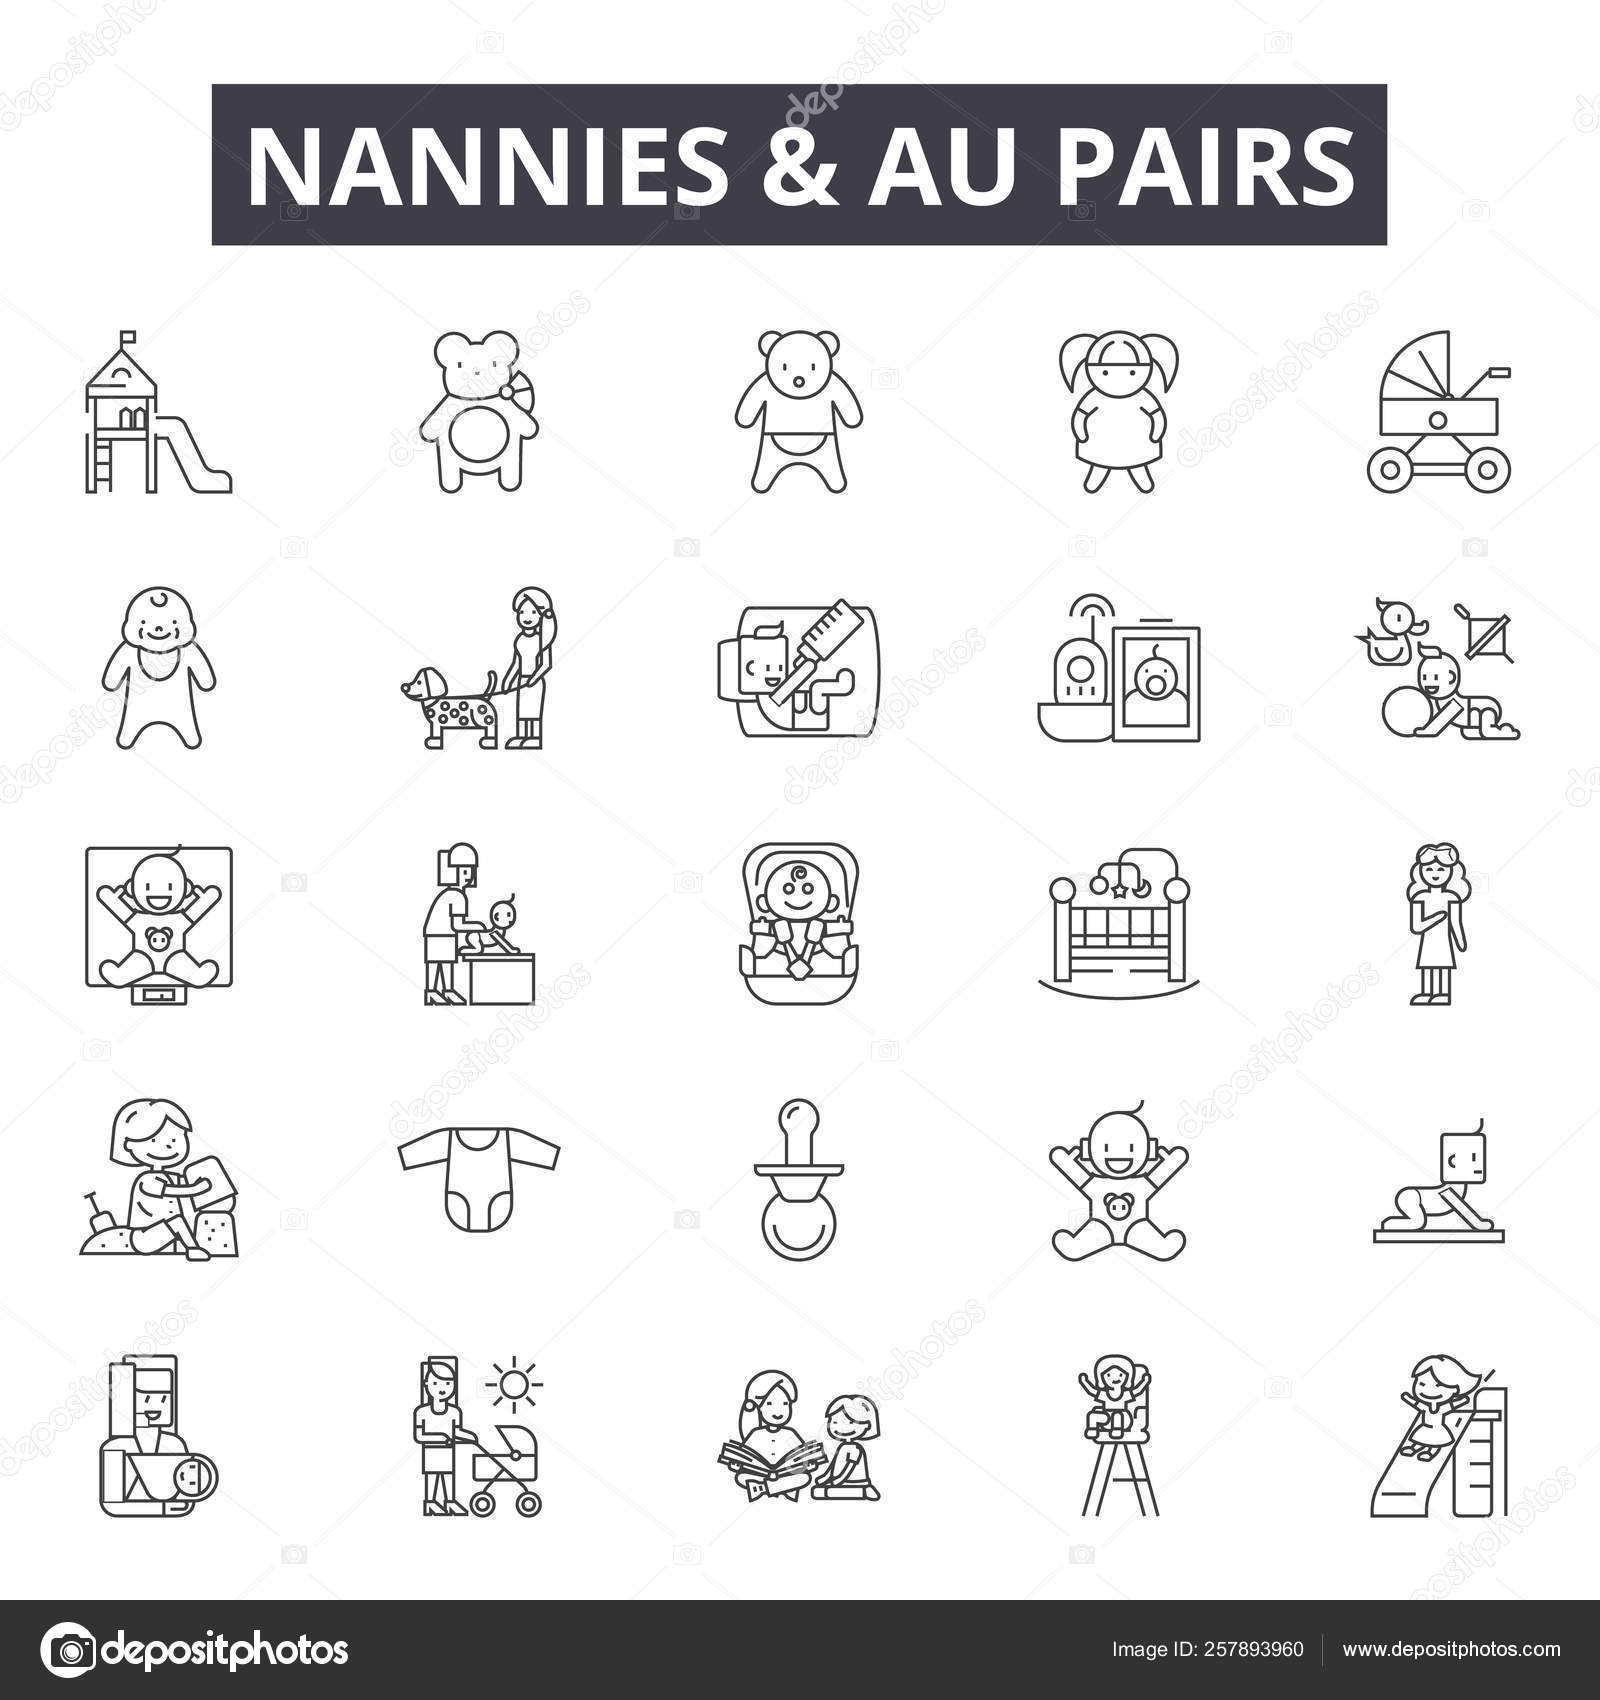 Nannies And Au Pairs Line Icons Signs Set Vector Nannies And Au Pairs Outline Concept Illustration Babysitter Nanny Child Care Baby Au Pair Logo Stock Vector C Iconsgraph